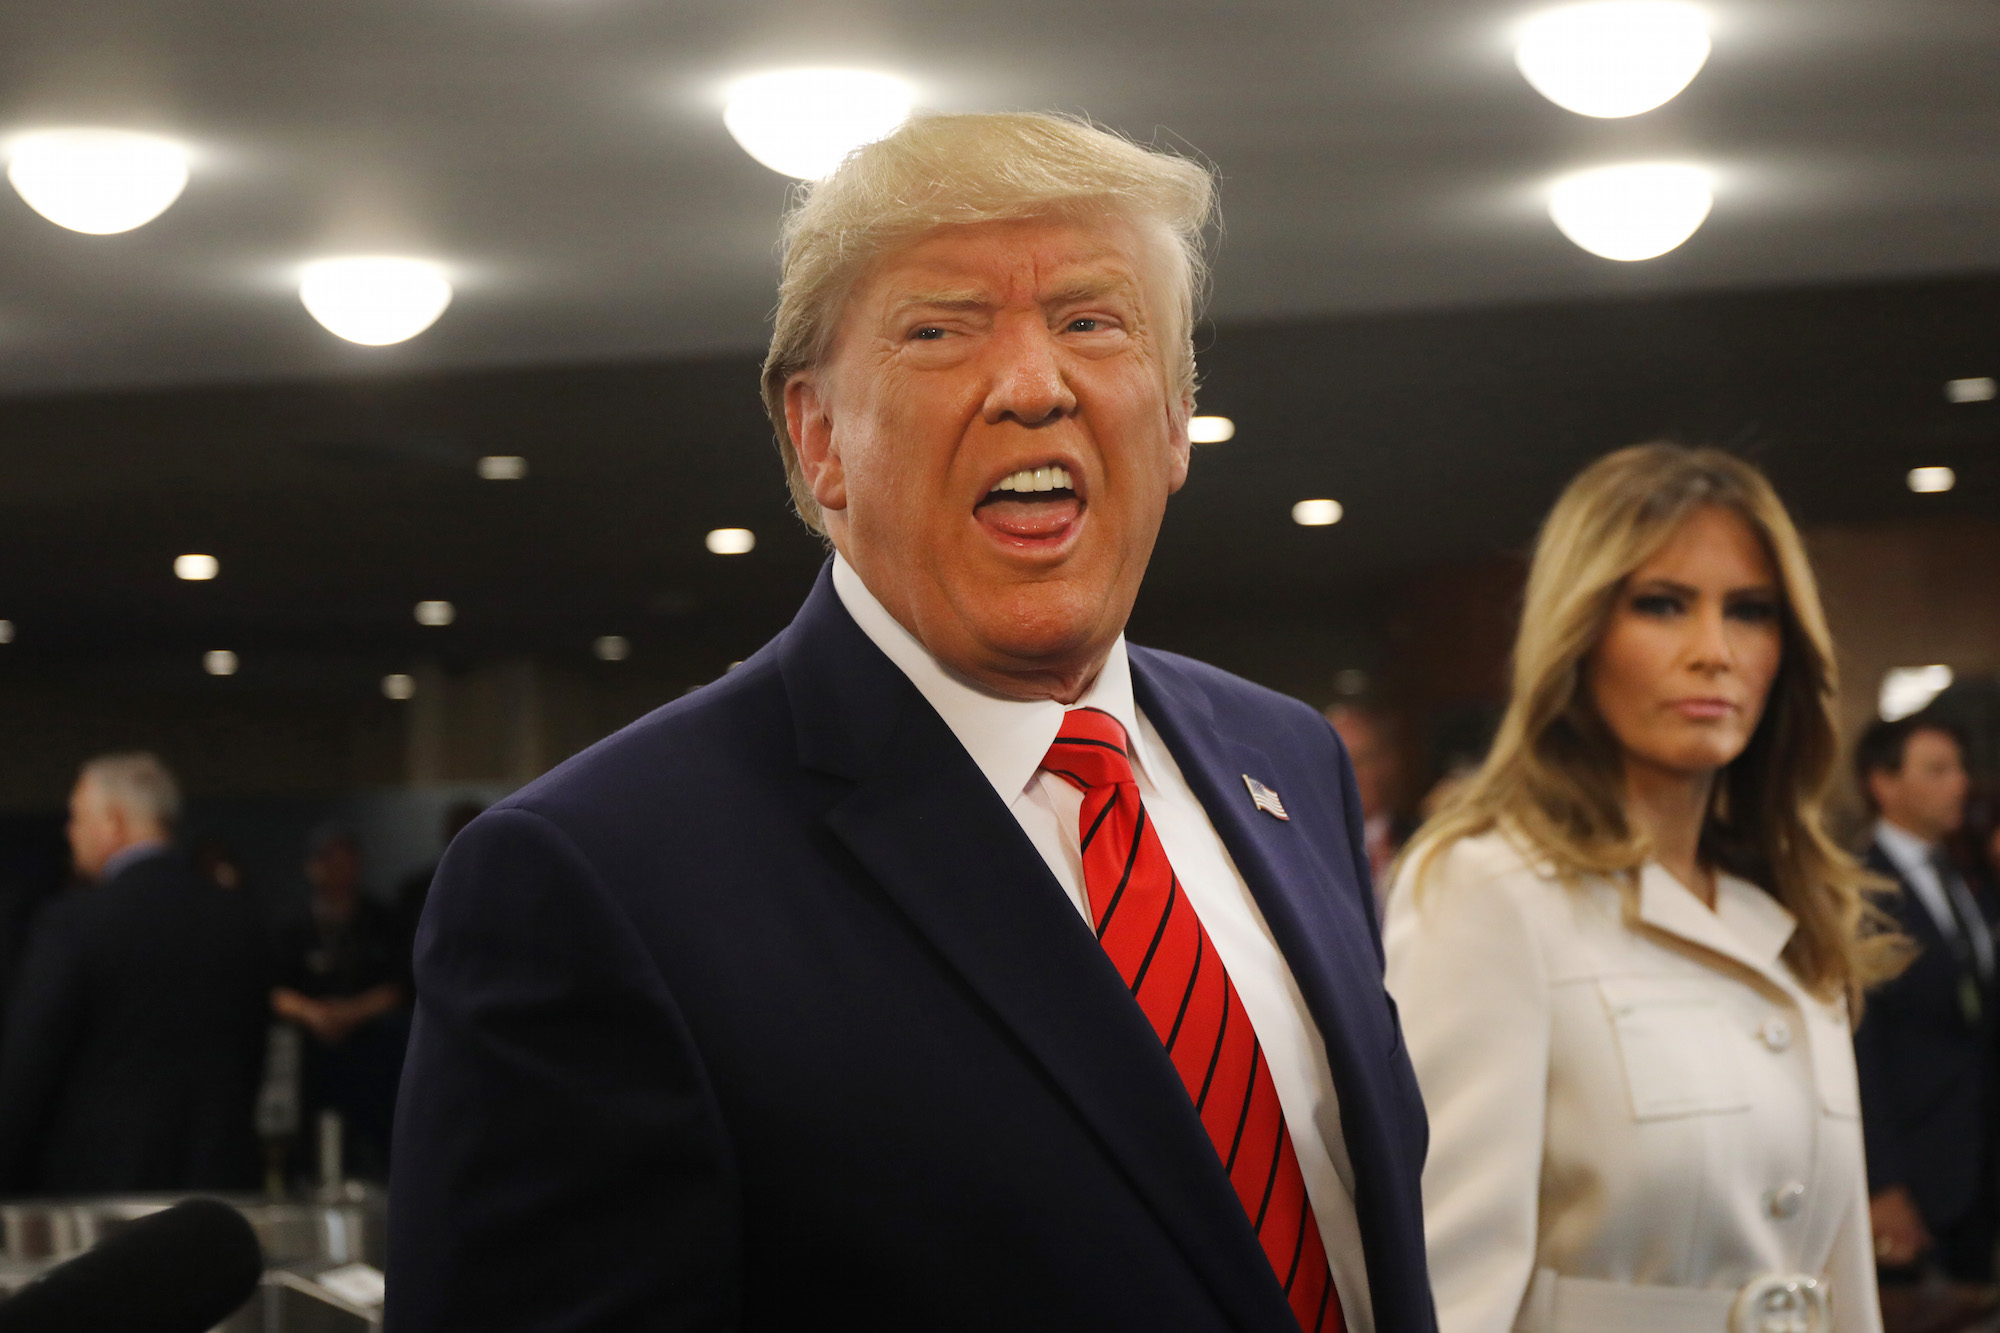 U.S. President Donald Trump, accompanied by first lady Melania Trump, speaks to the media at the United Nations (U.N.) General Assembly on September 24, 2019 in New York City. Photo: Spencer Platt/Getty Images.